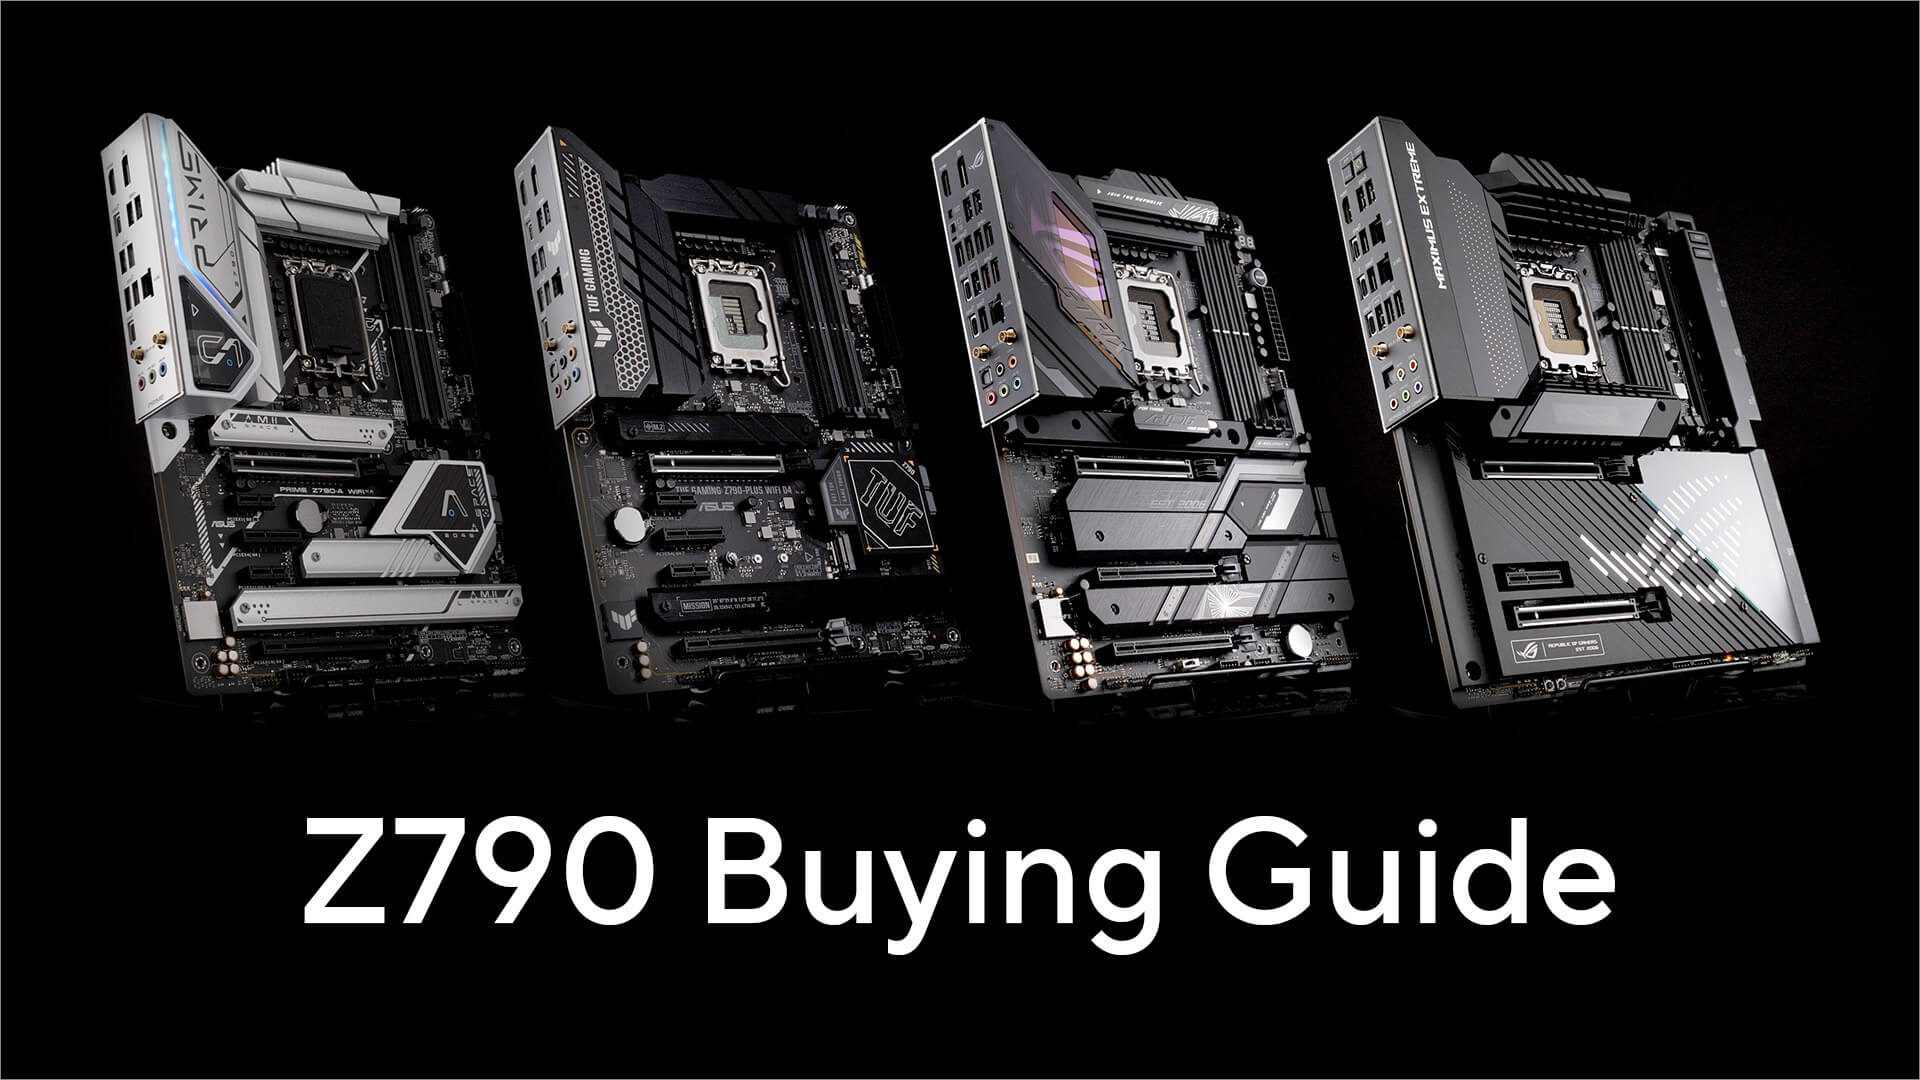 Image with four ASUS & ROG Z790 motherboards